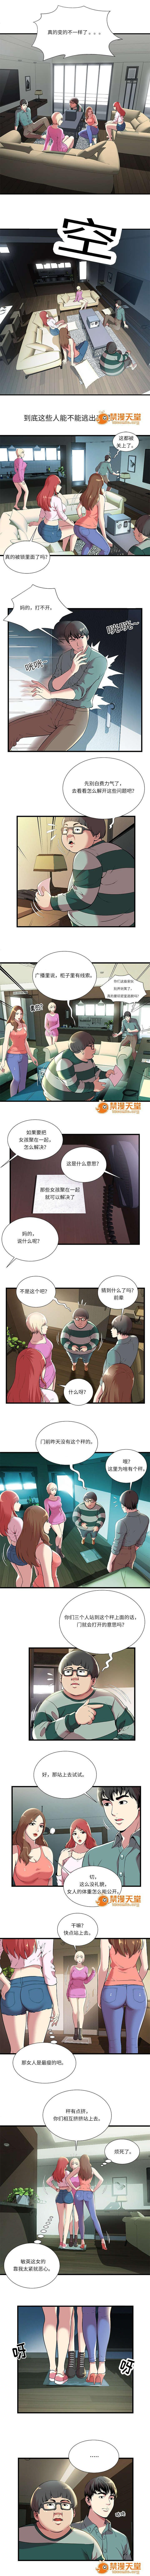 Doctor 脫逃遊戲 1-37 Hidden Camera - Page 4